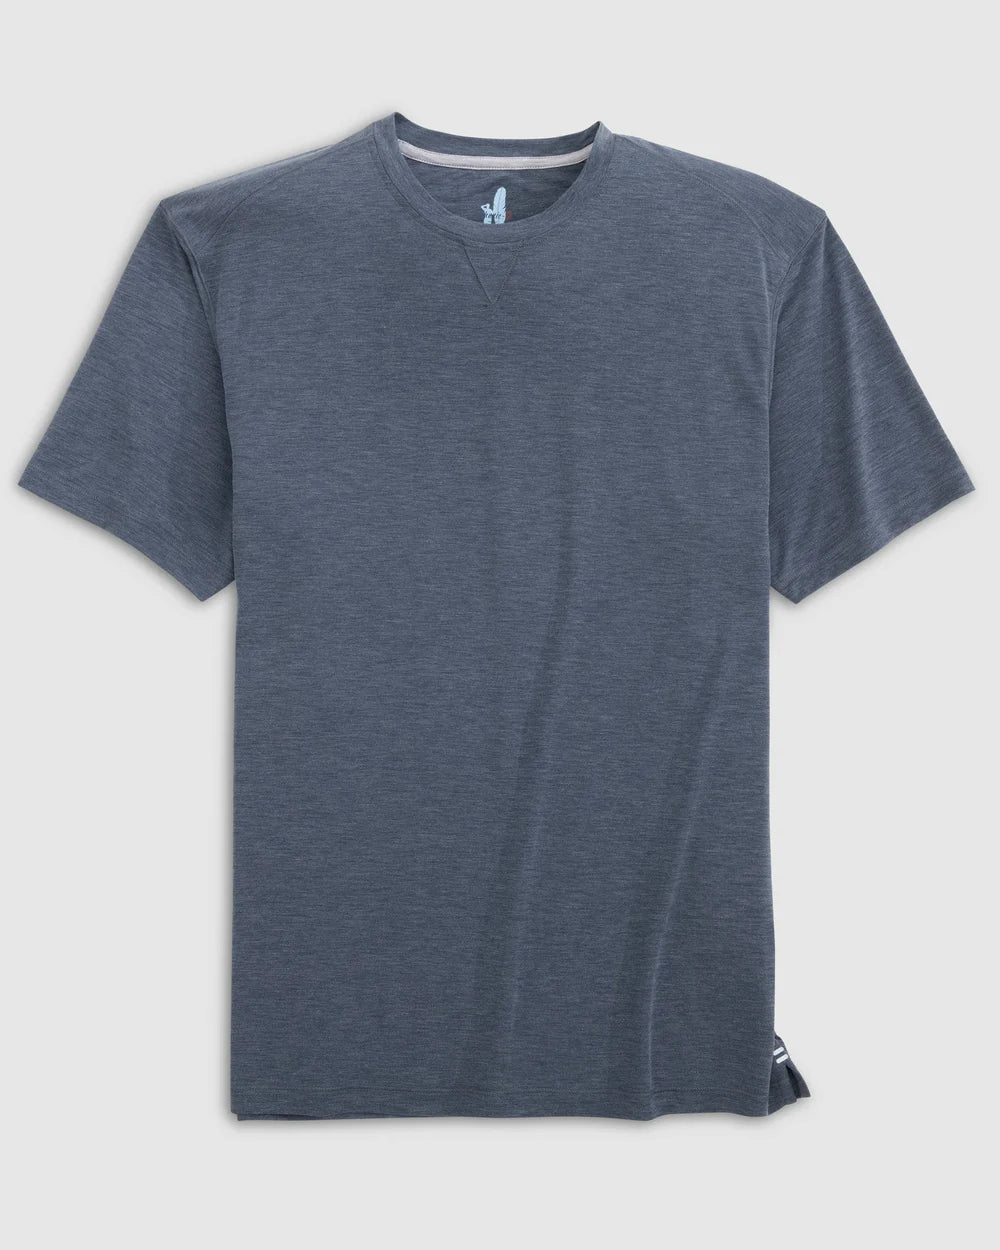 The Course Performance Tee